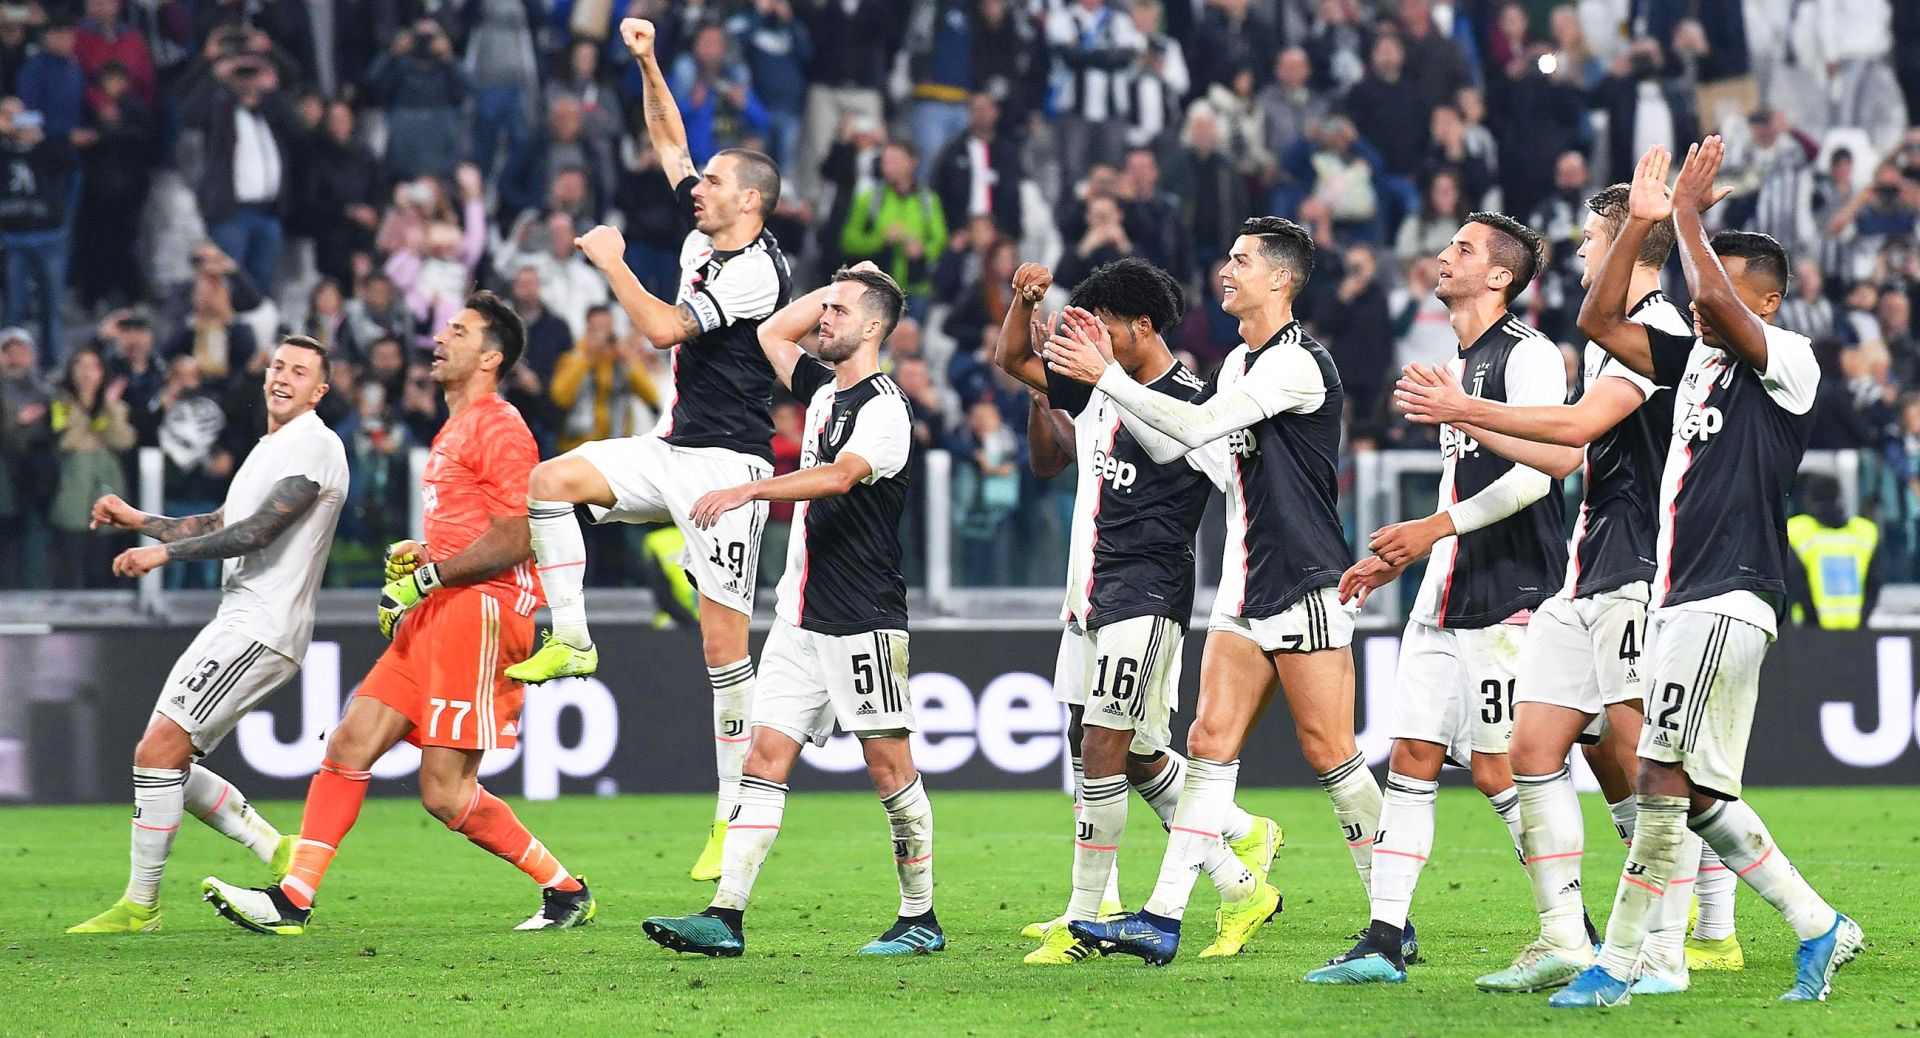 epa07934995 Juventus players celebrate after the Italian Serie A soccer match between Juventus FC and Bologna FC in Turin, Italy, 19 October 2019.  EPA/ALESSANDRO DI MARCO